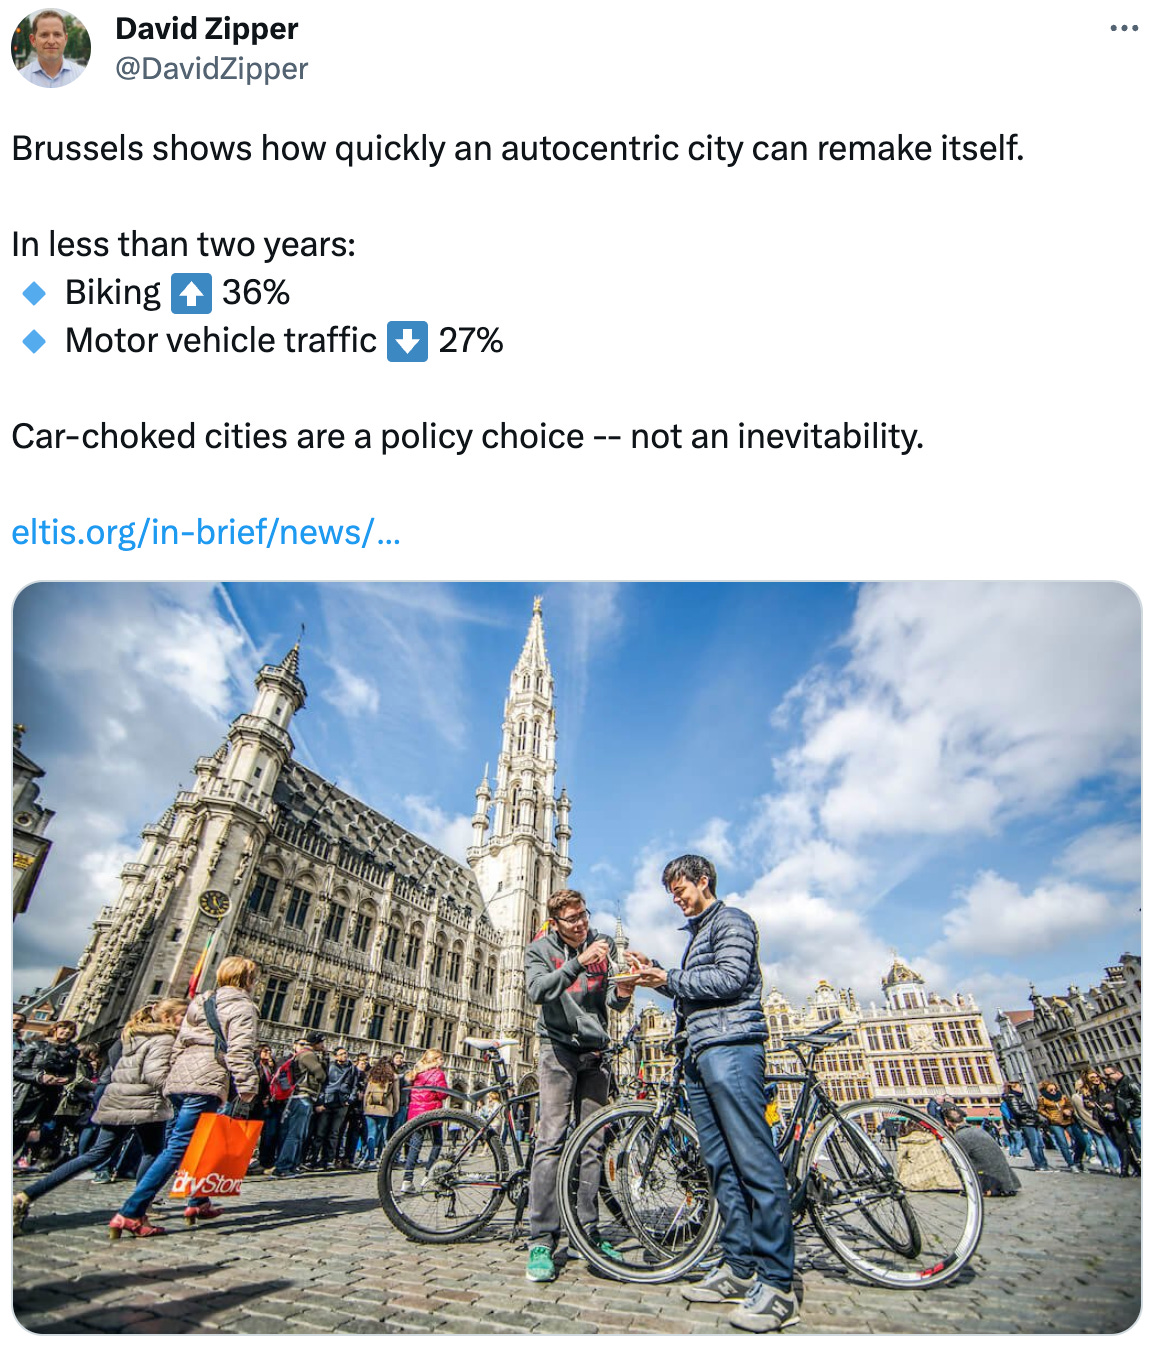  See new posts Conversation David Zipper @DavidZipper Brussels shows how quickly an autocentric city can remake itself.     In less than two years:  🔹 Biking ⬆️ 36%  🔹 Motor vehicle traffic ⬇️ 27%     Car-choked cities are a policy choice -- not an inevitability.  https://eltis.org/in-brief/news/one-year-good-move-brussels-city-25-less-car-traffic-and-36-more-bicycles